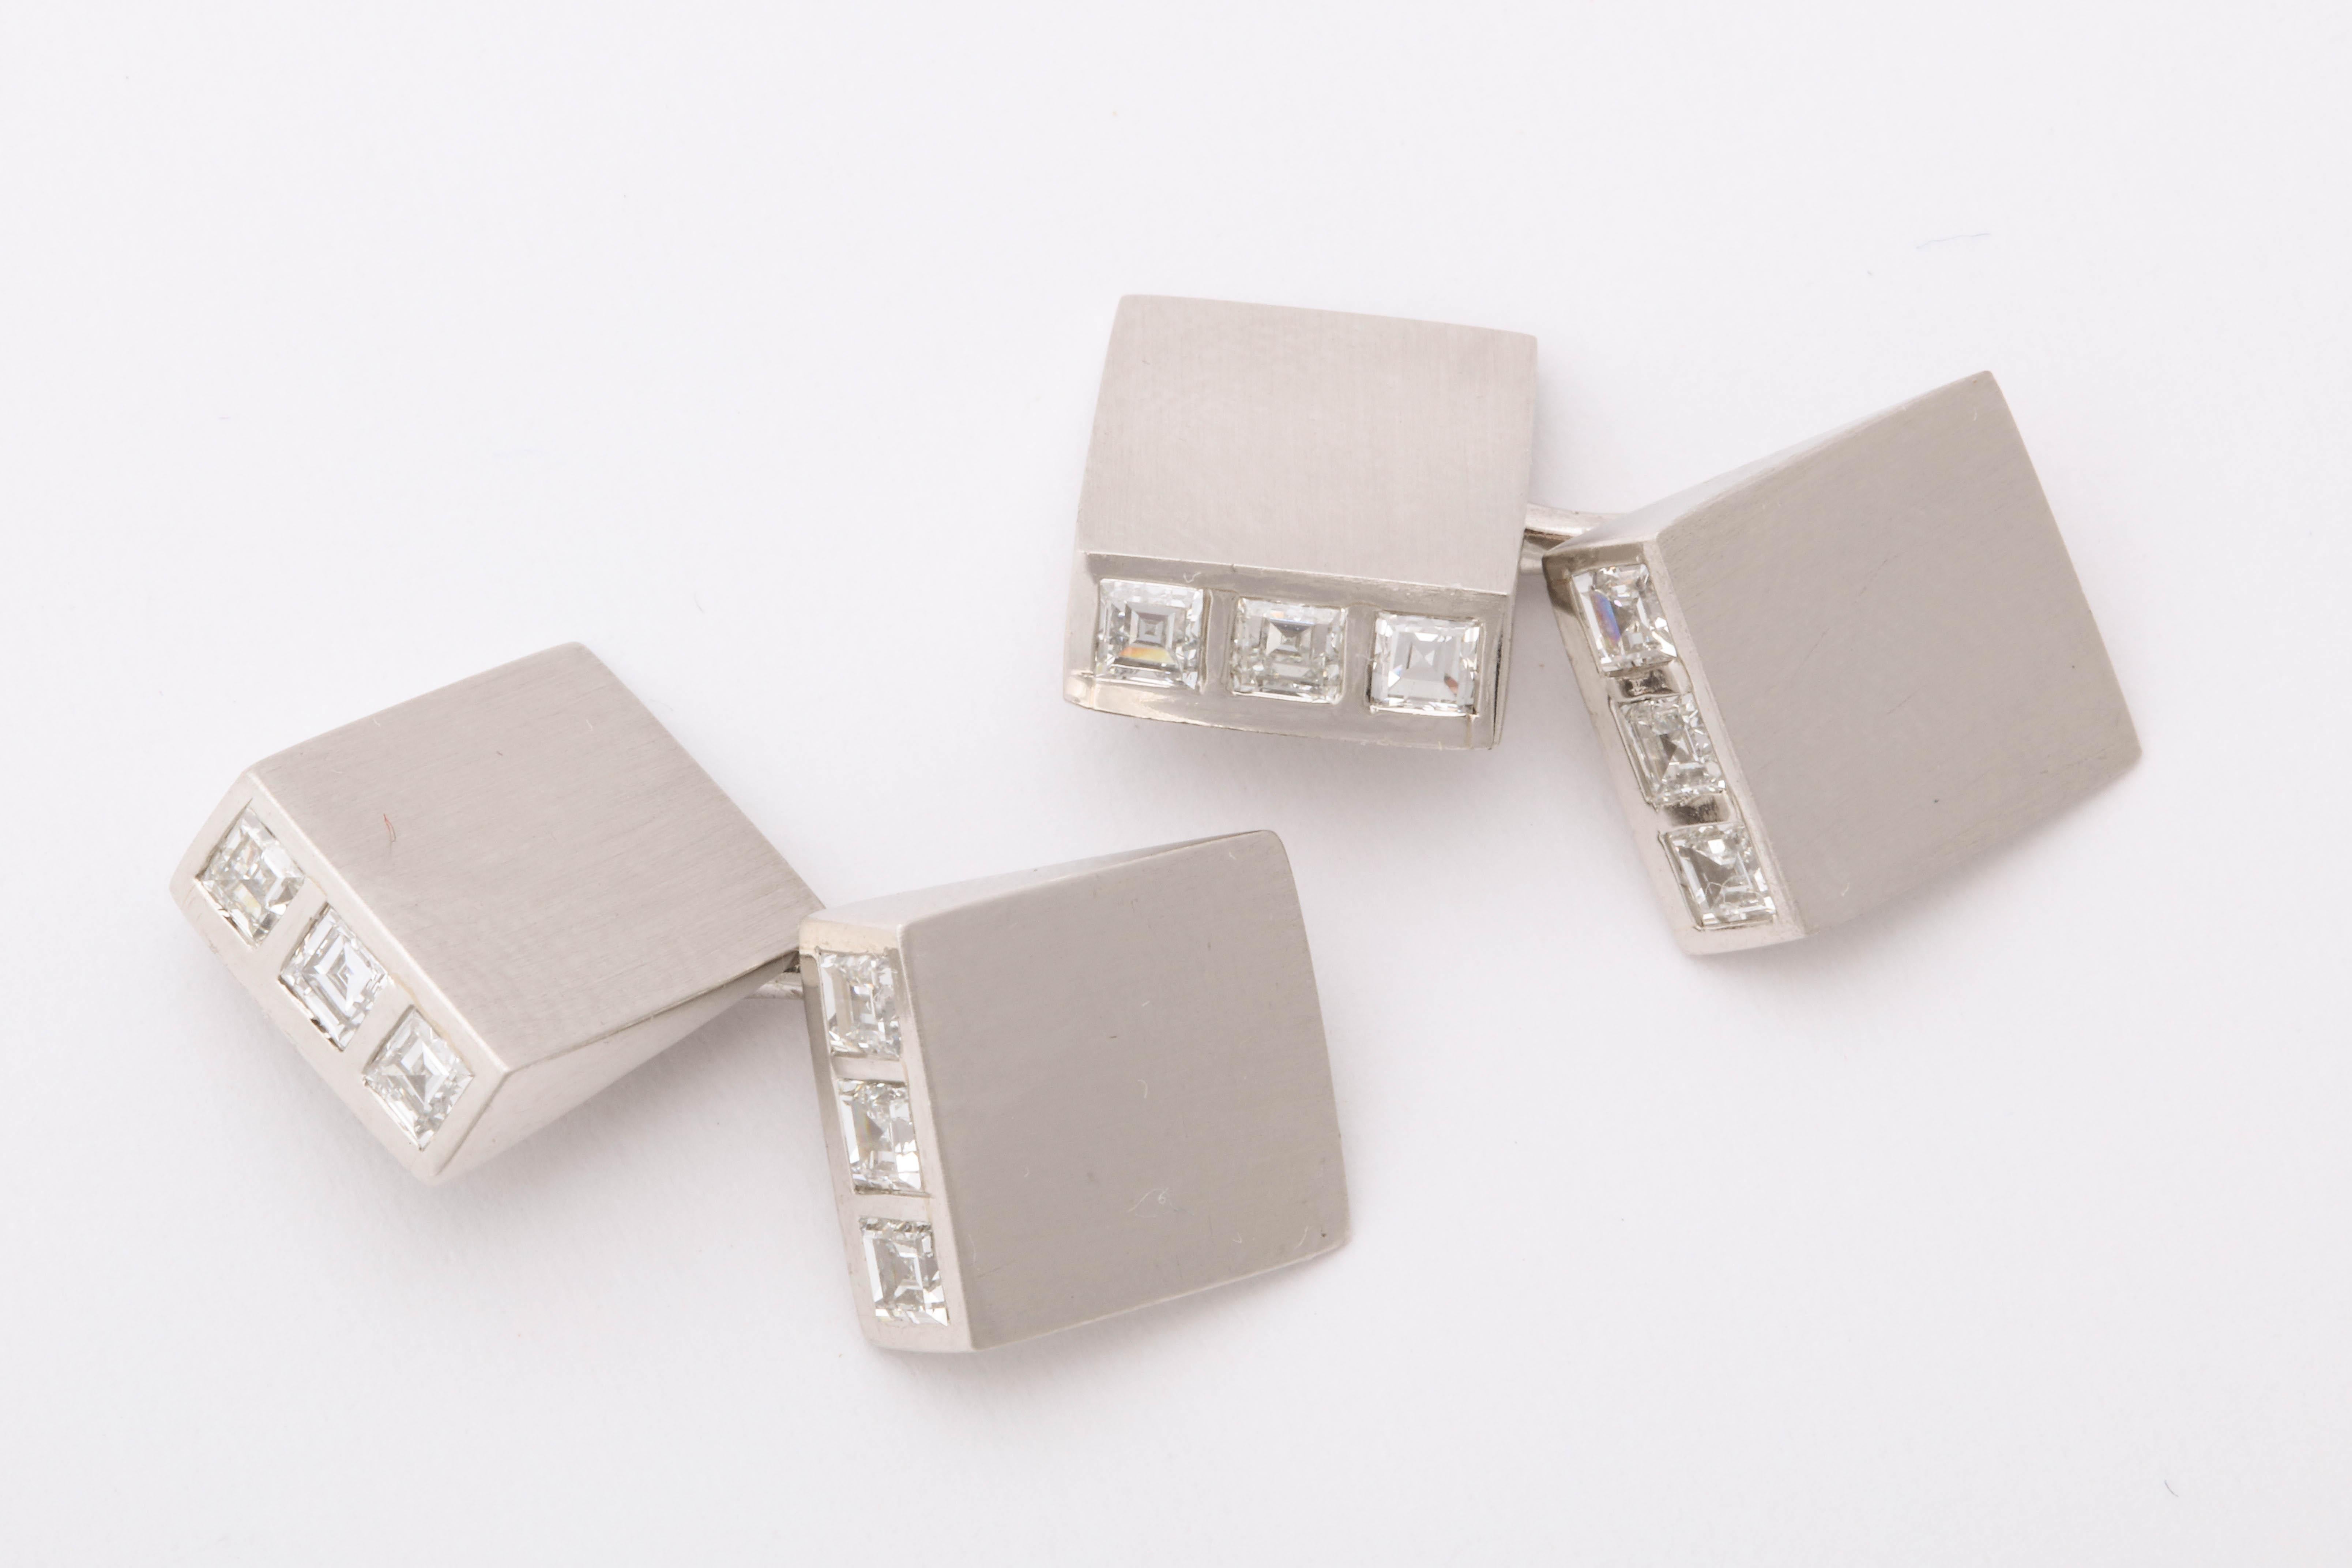 Platinum cufflinks, each link set with 3 diamonds for a total of 12 diamonds. In original box. Made by Cartier.